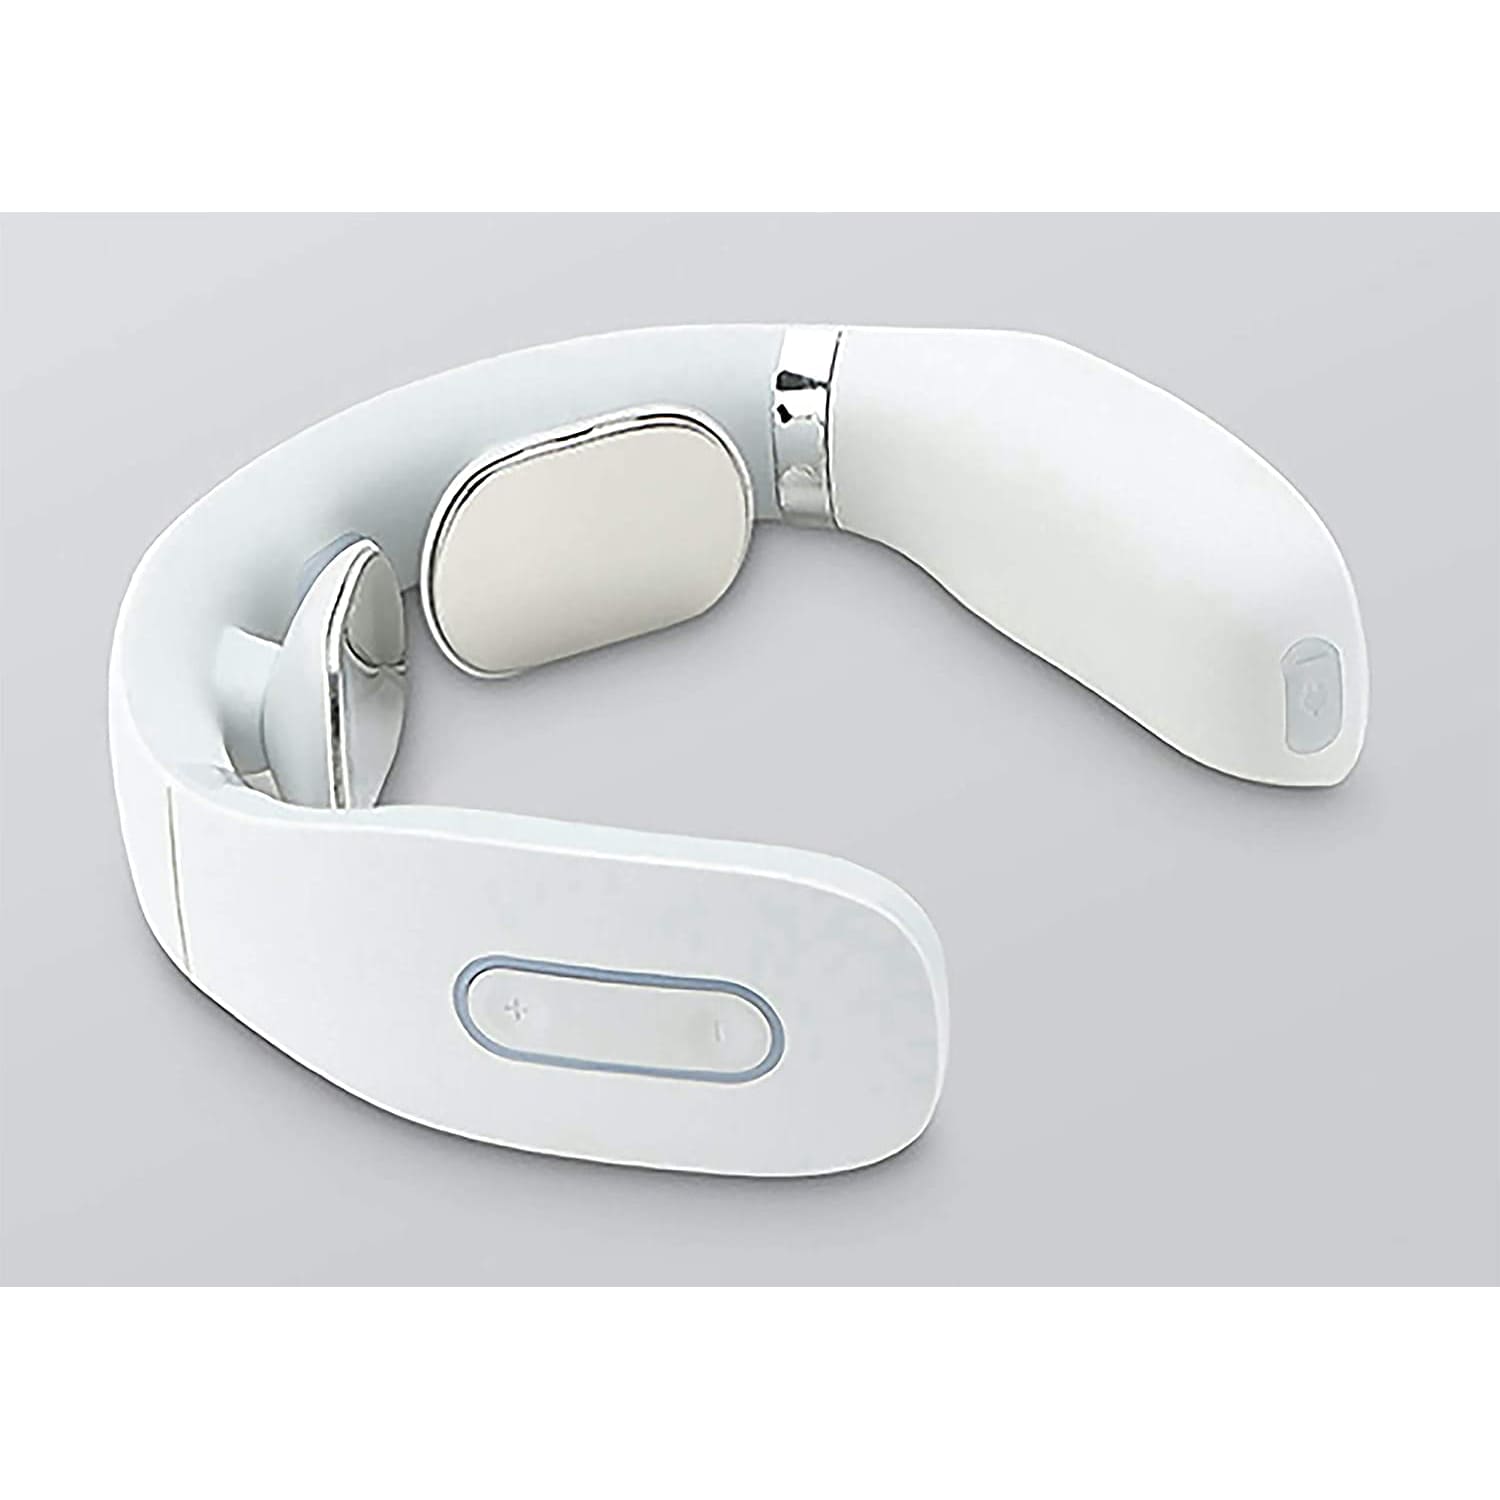 https://assets.dragonmart.ae//pictures/0245720_xiaomi-jeeback-g2-smart-neck-massager-white.png